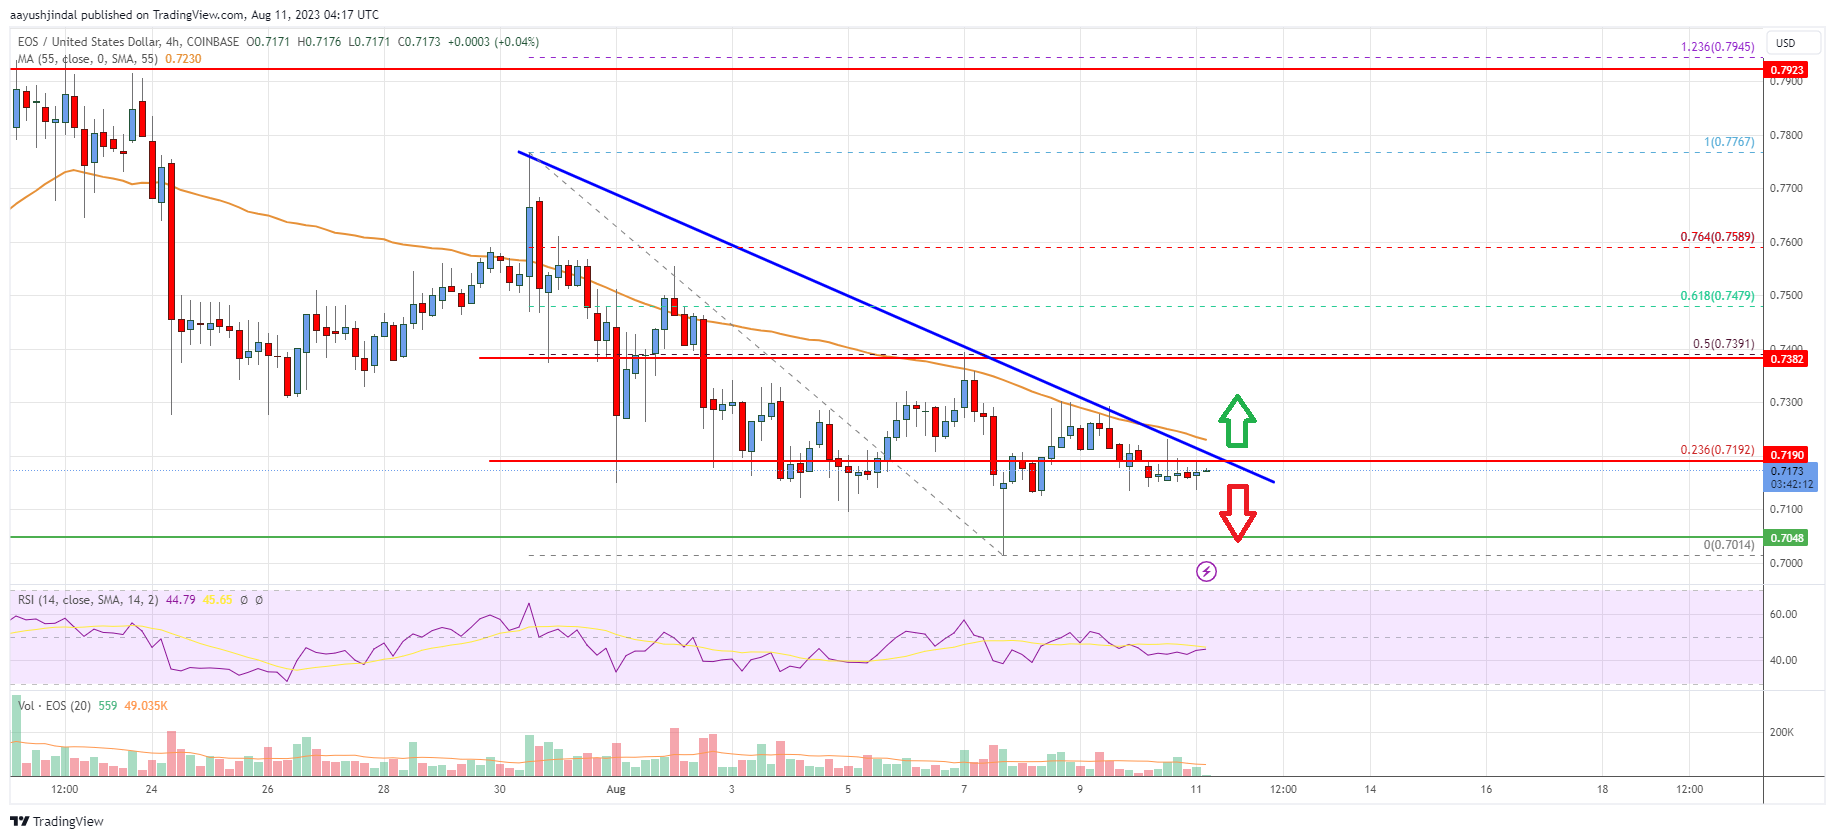 EOS Price Analysis: Bears Aim For $0.65 or Lower